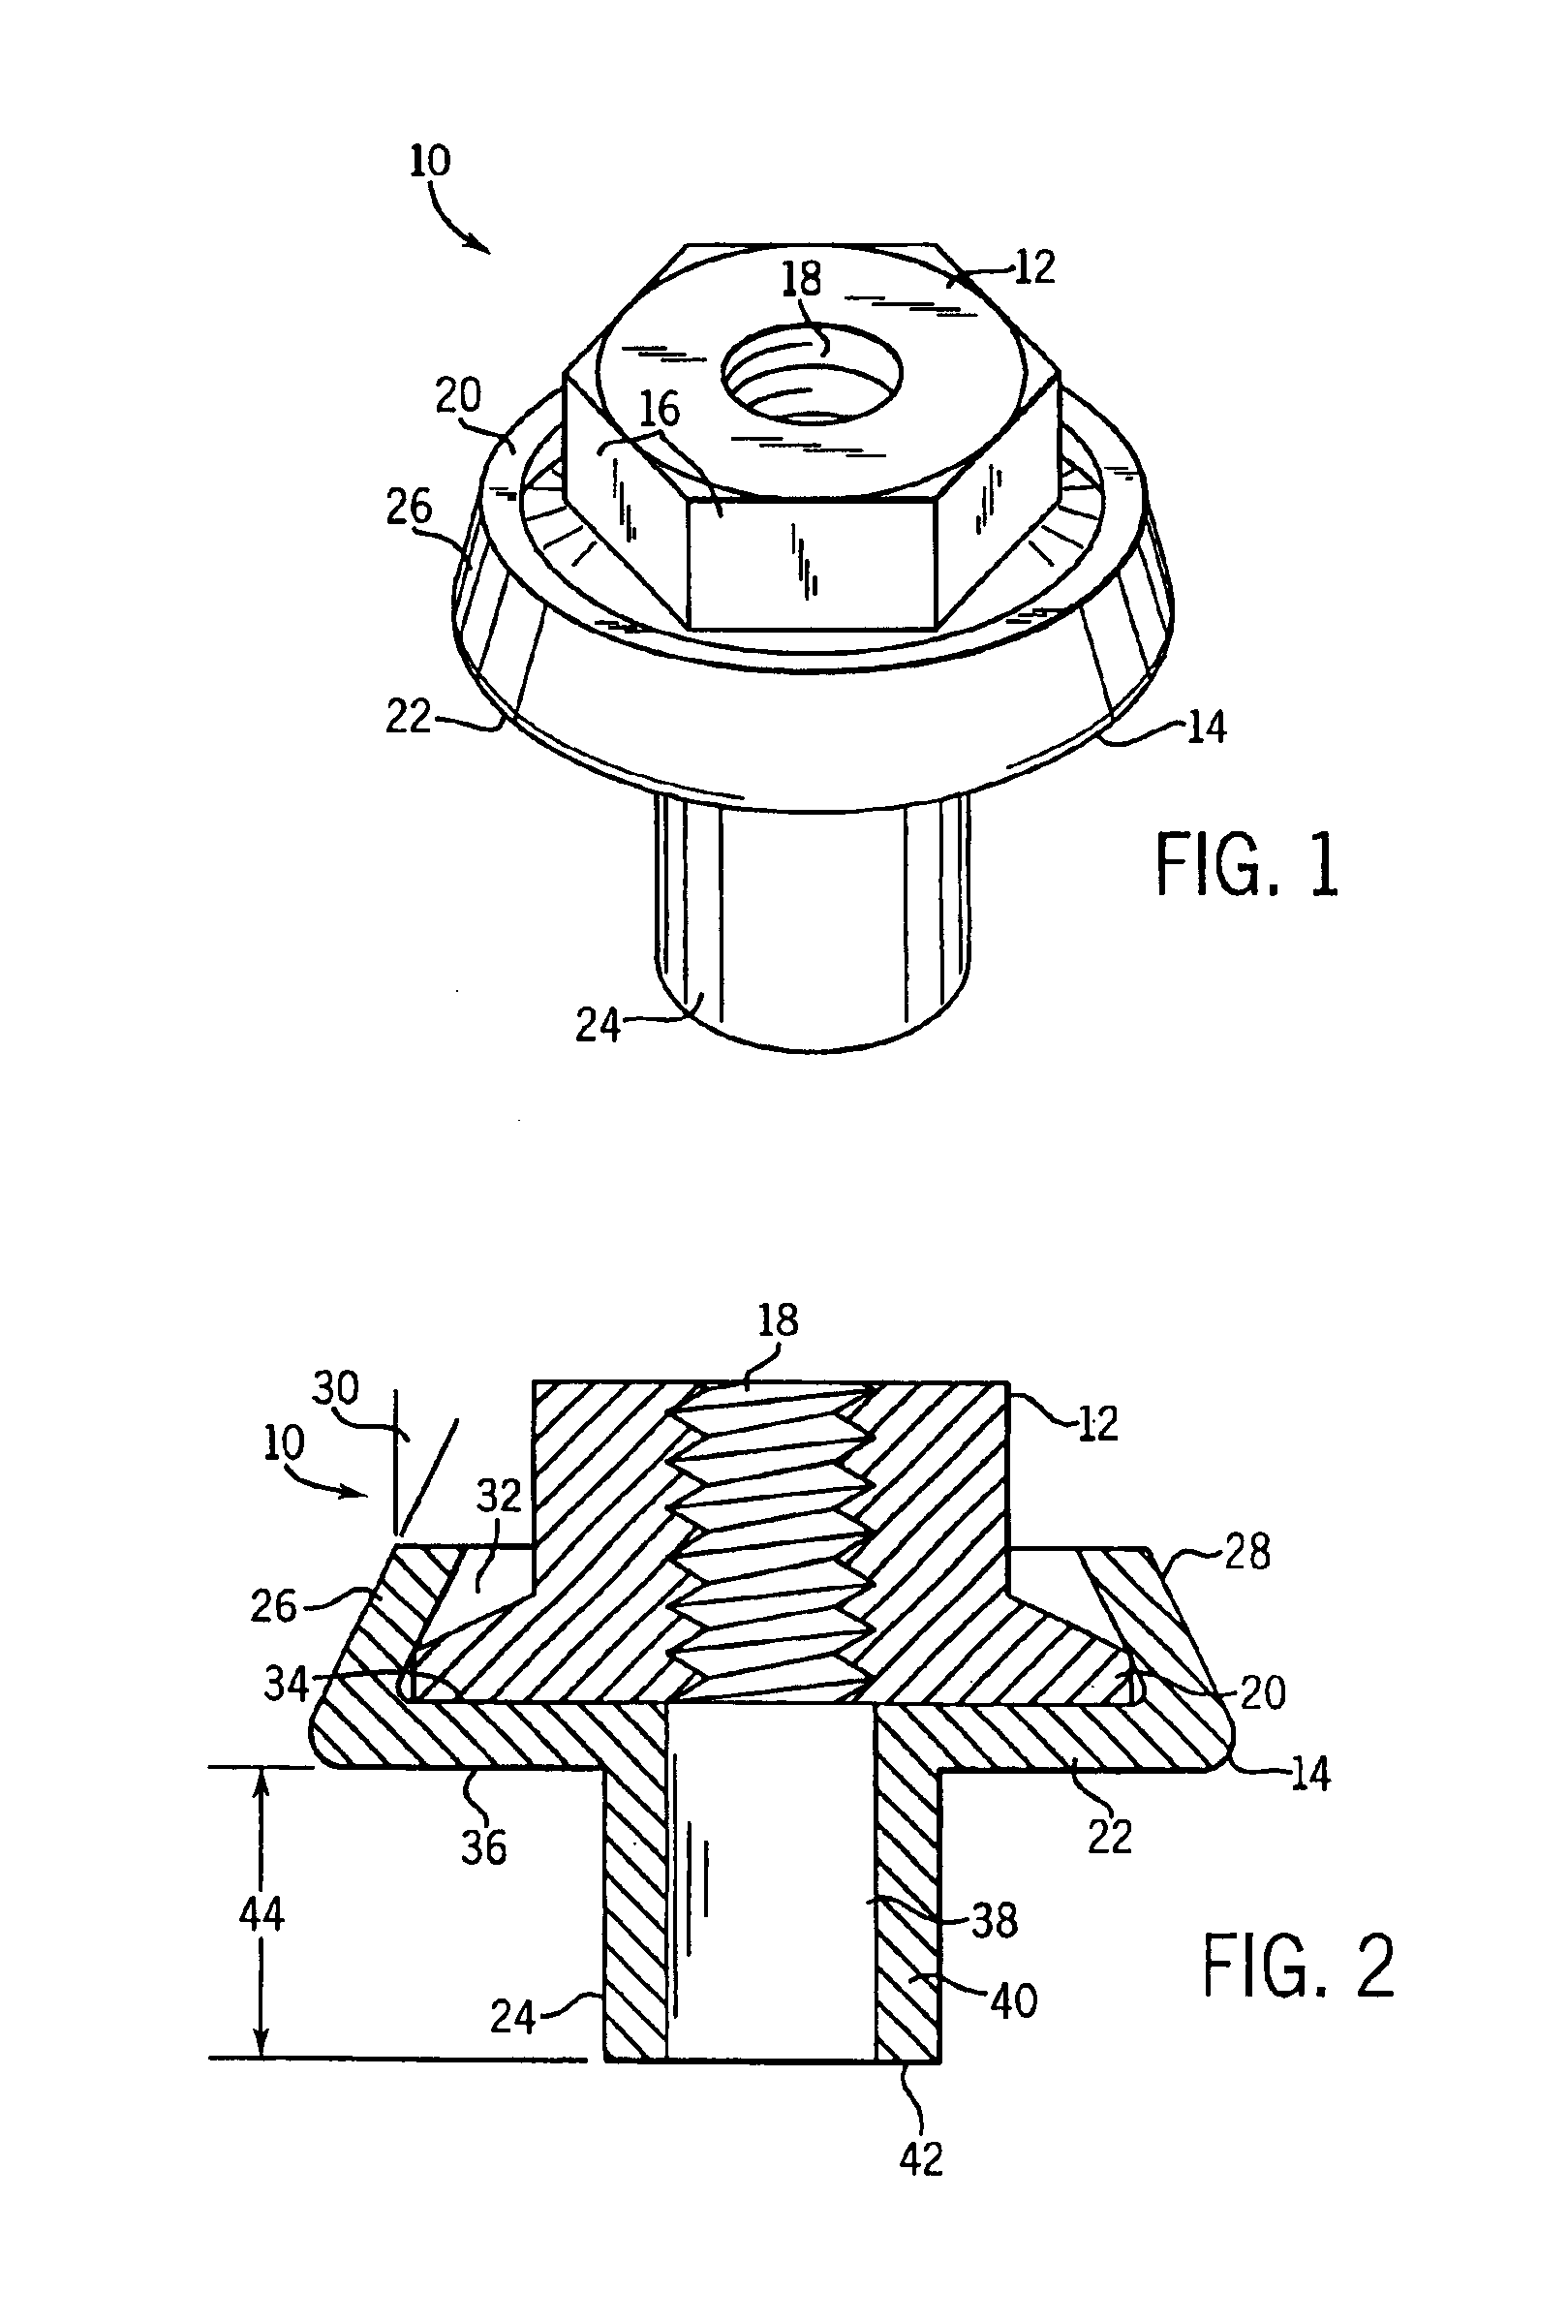 Internally threaded fastener and stemmed washer assembly and method for making same